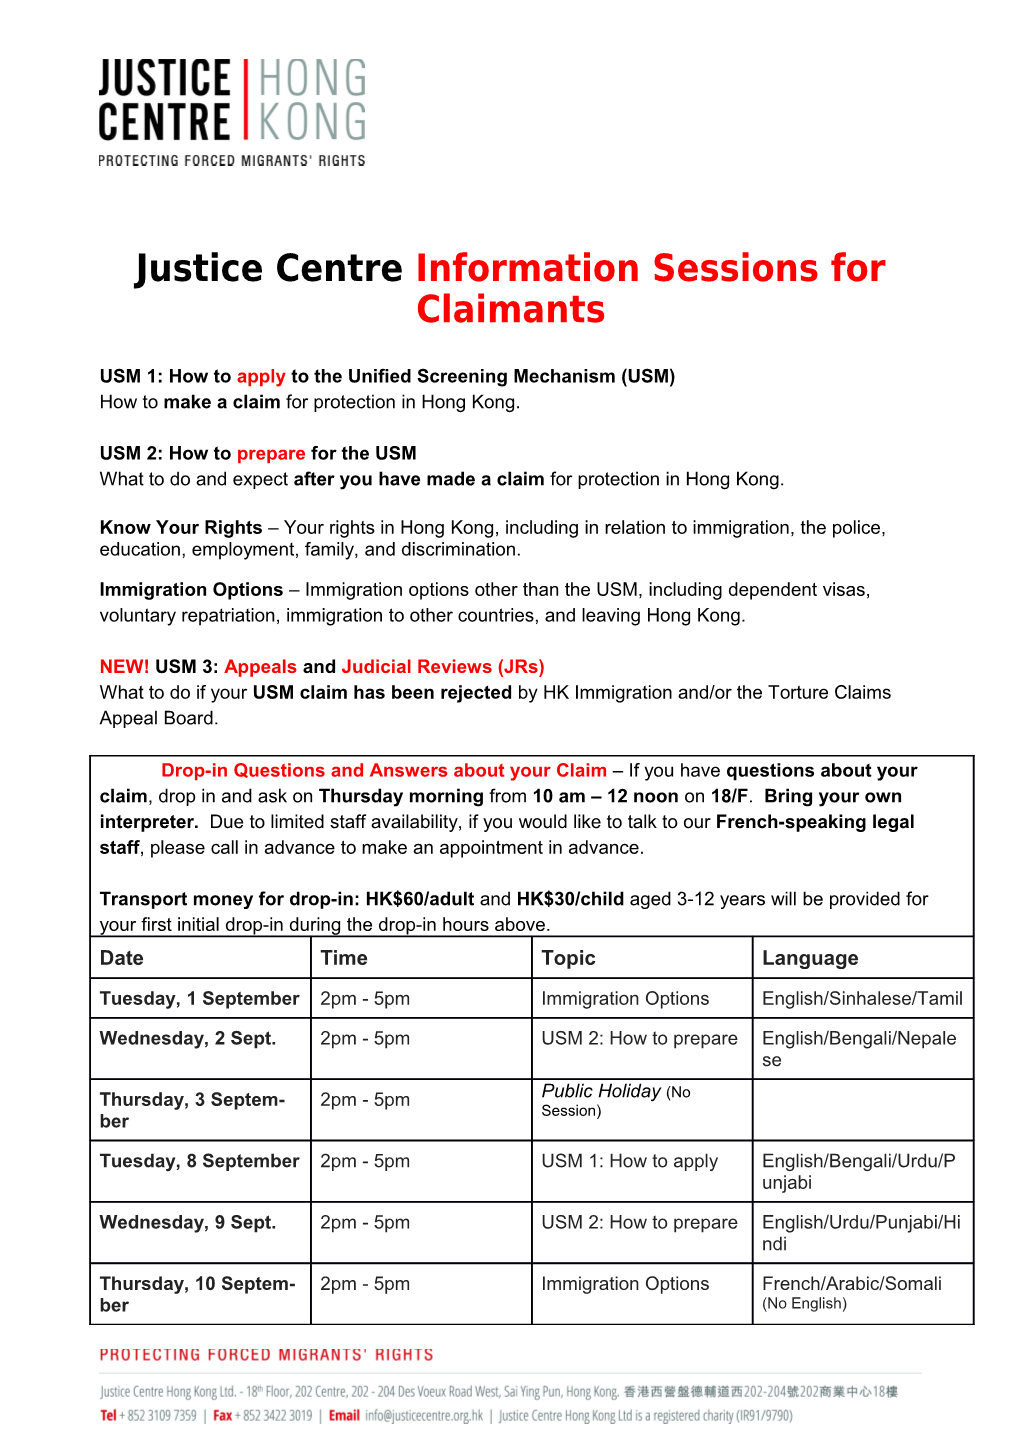 Justice Centre Information Sessions for Claimants